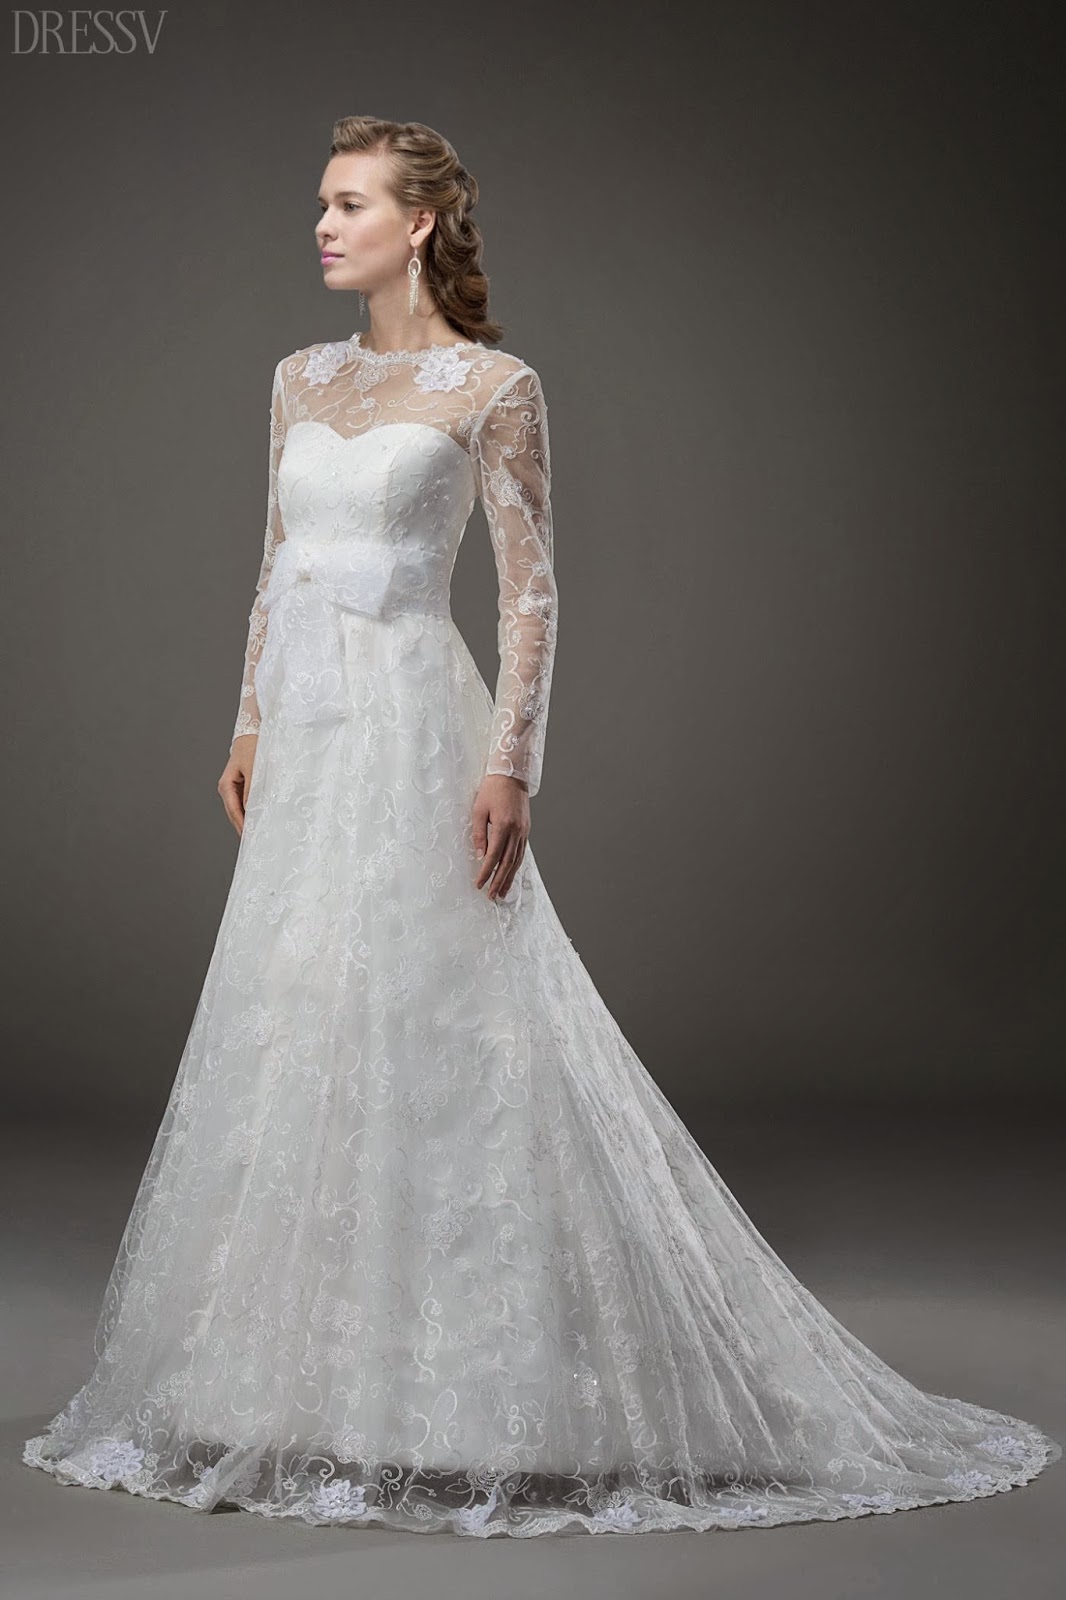 Fashion With Fitness: Wedding Dresses 2014 Collection by Dressv